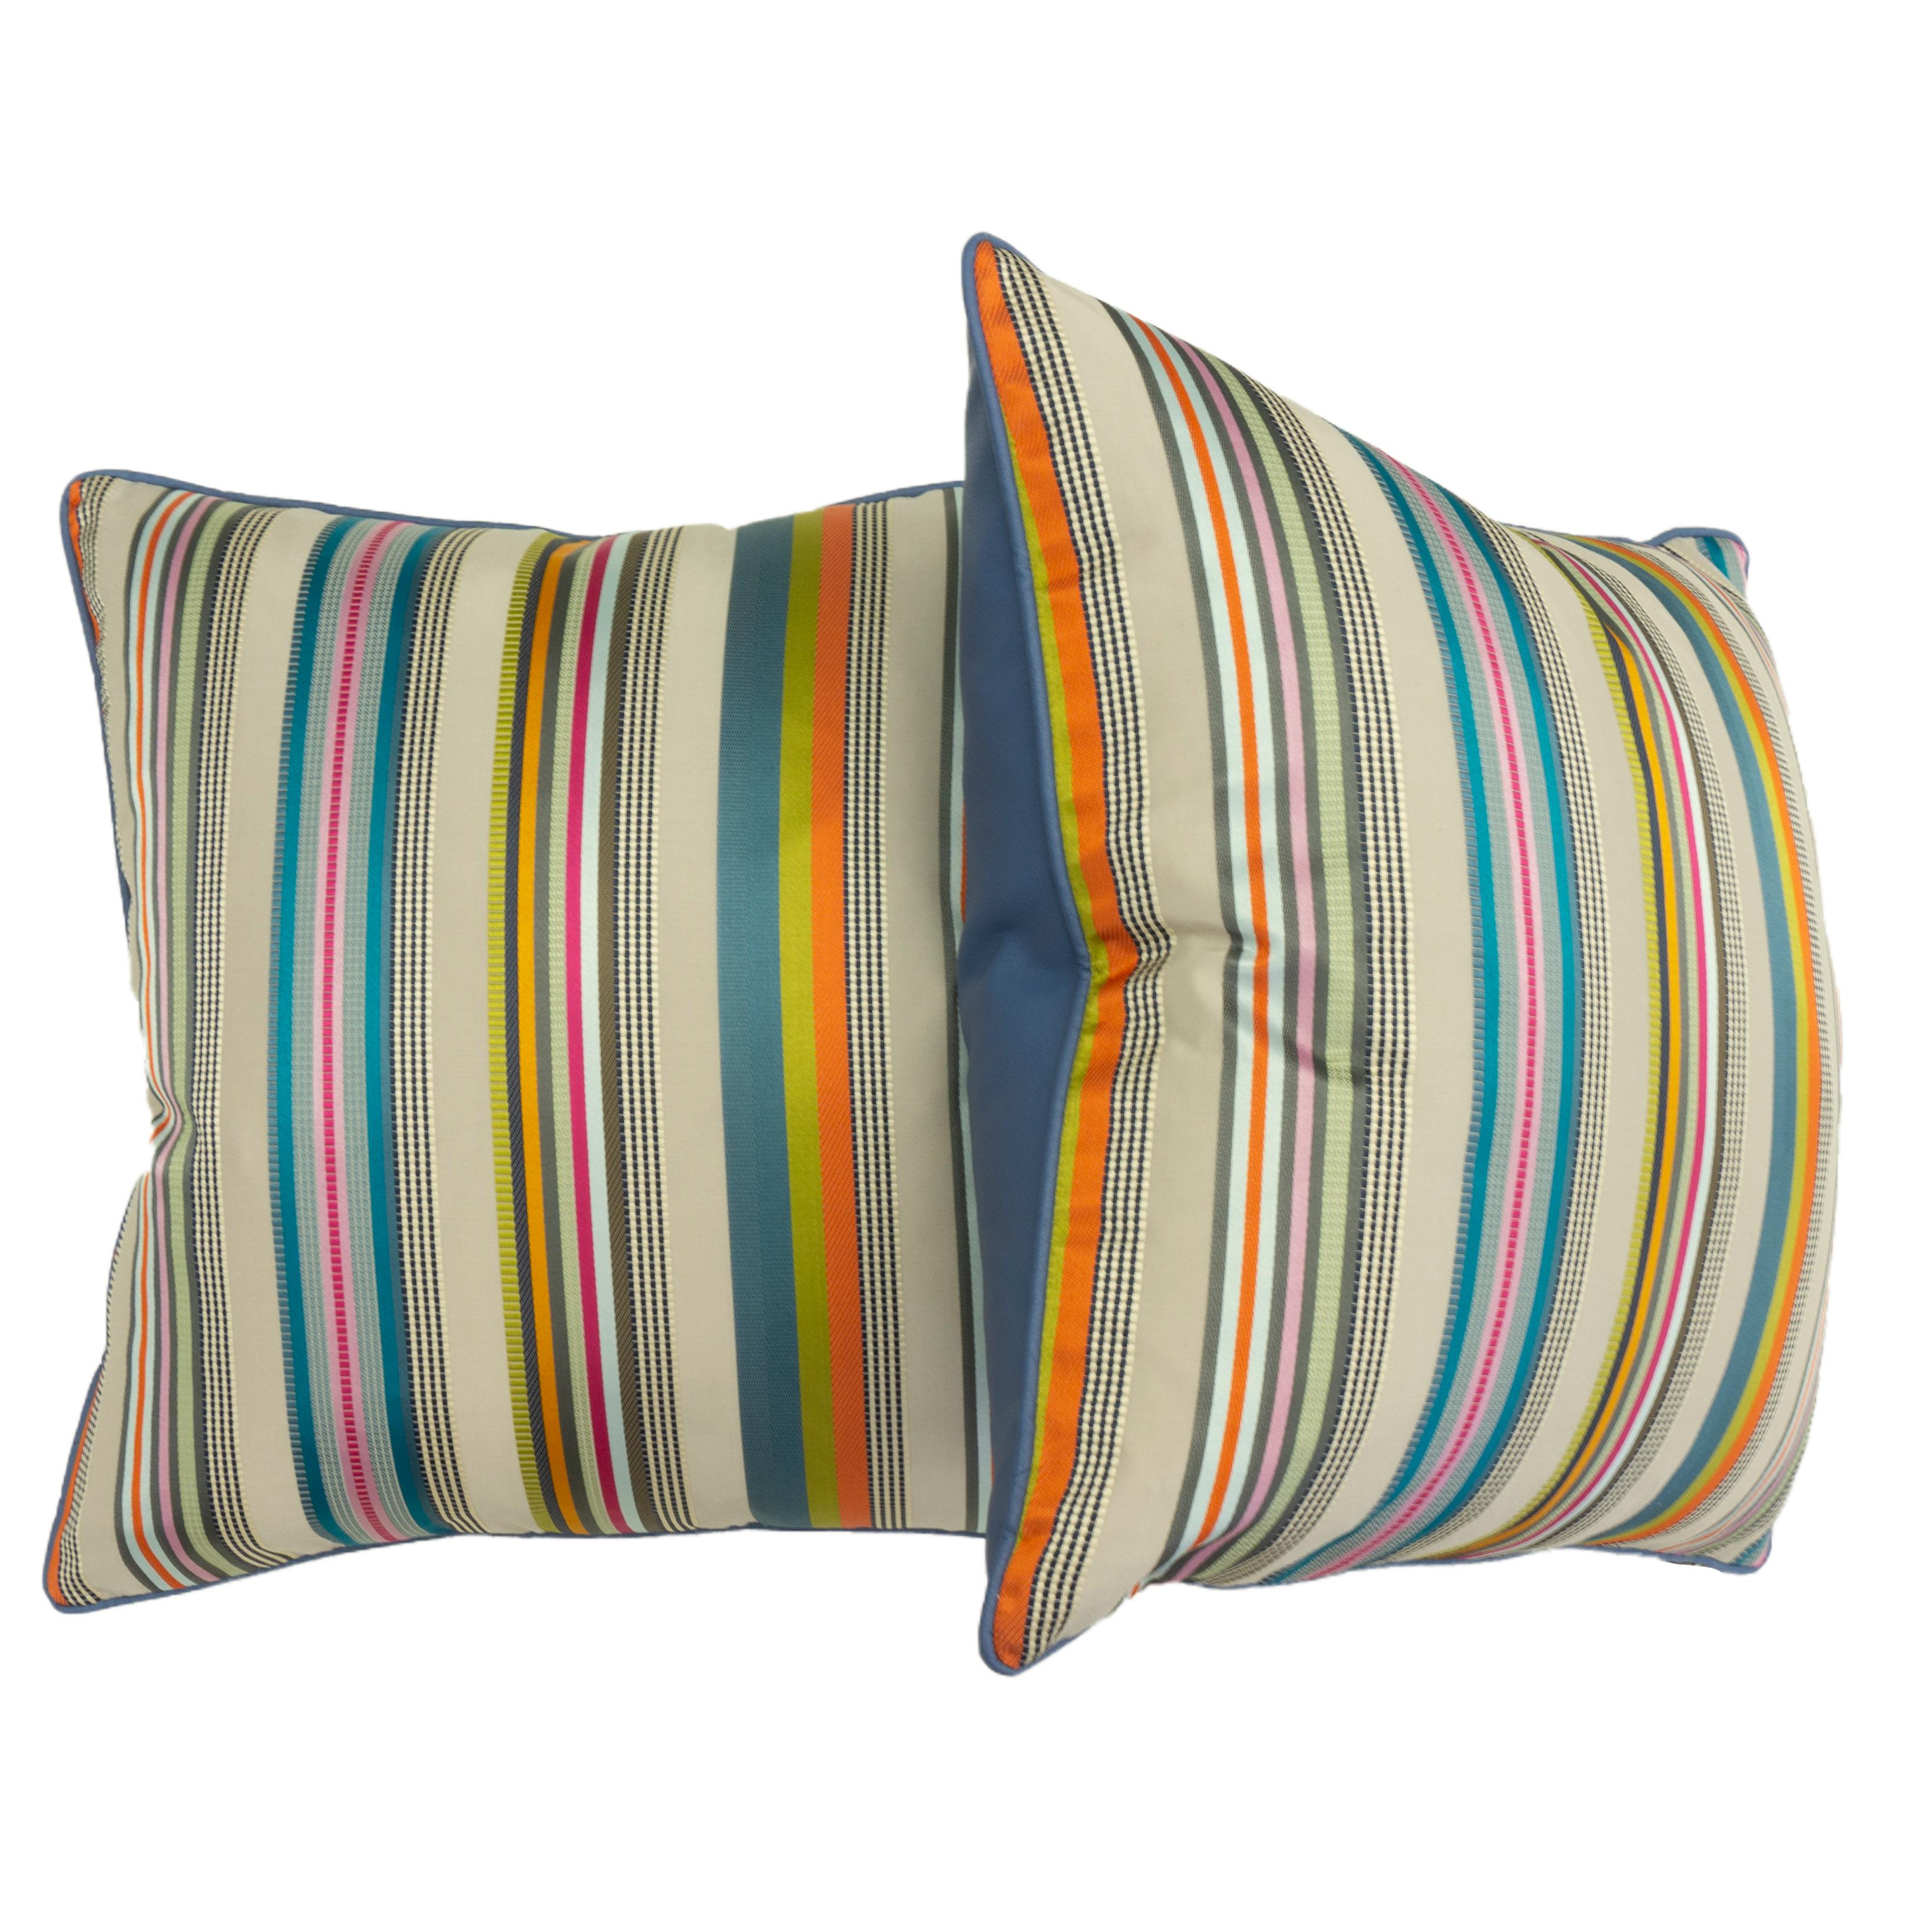 American Throw Pillows with Colorful Satin Stripes